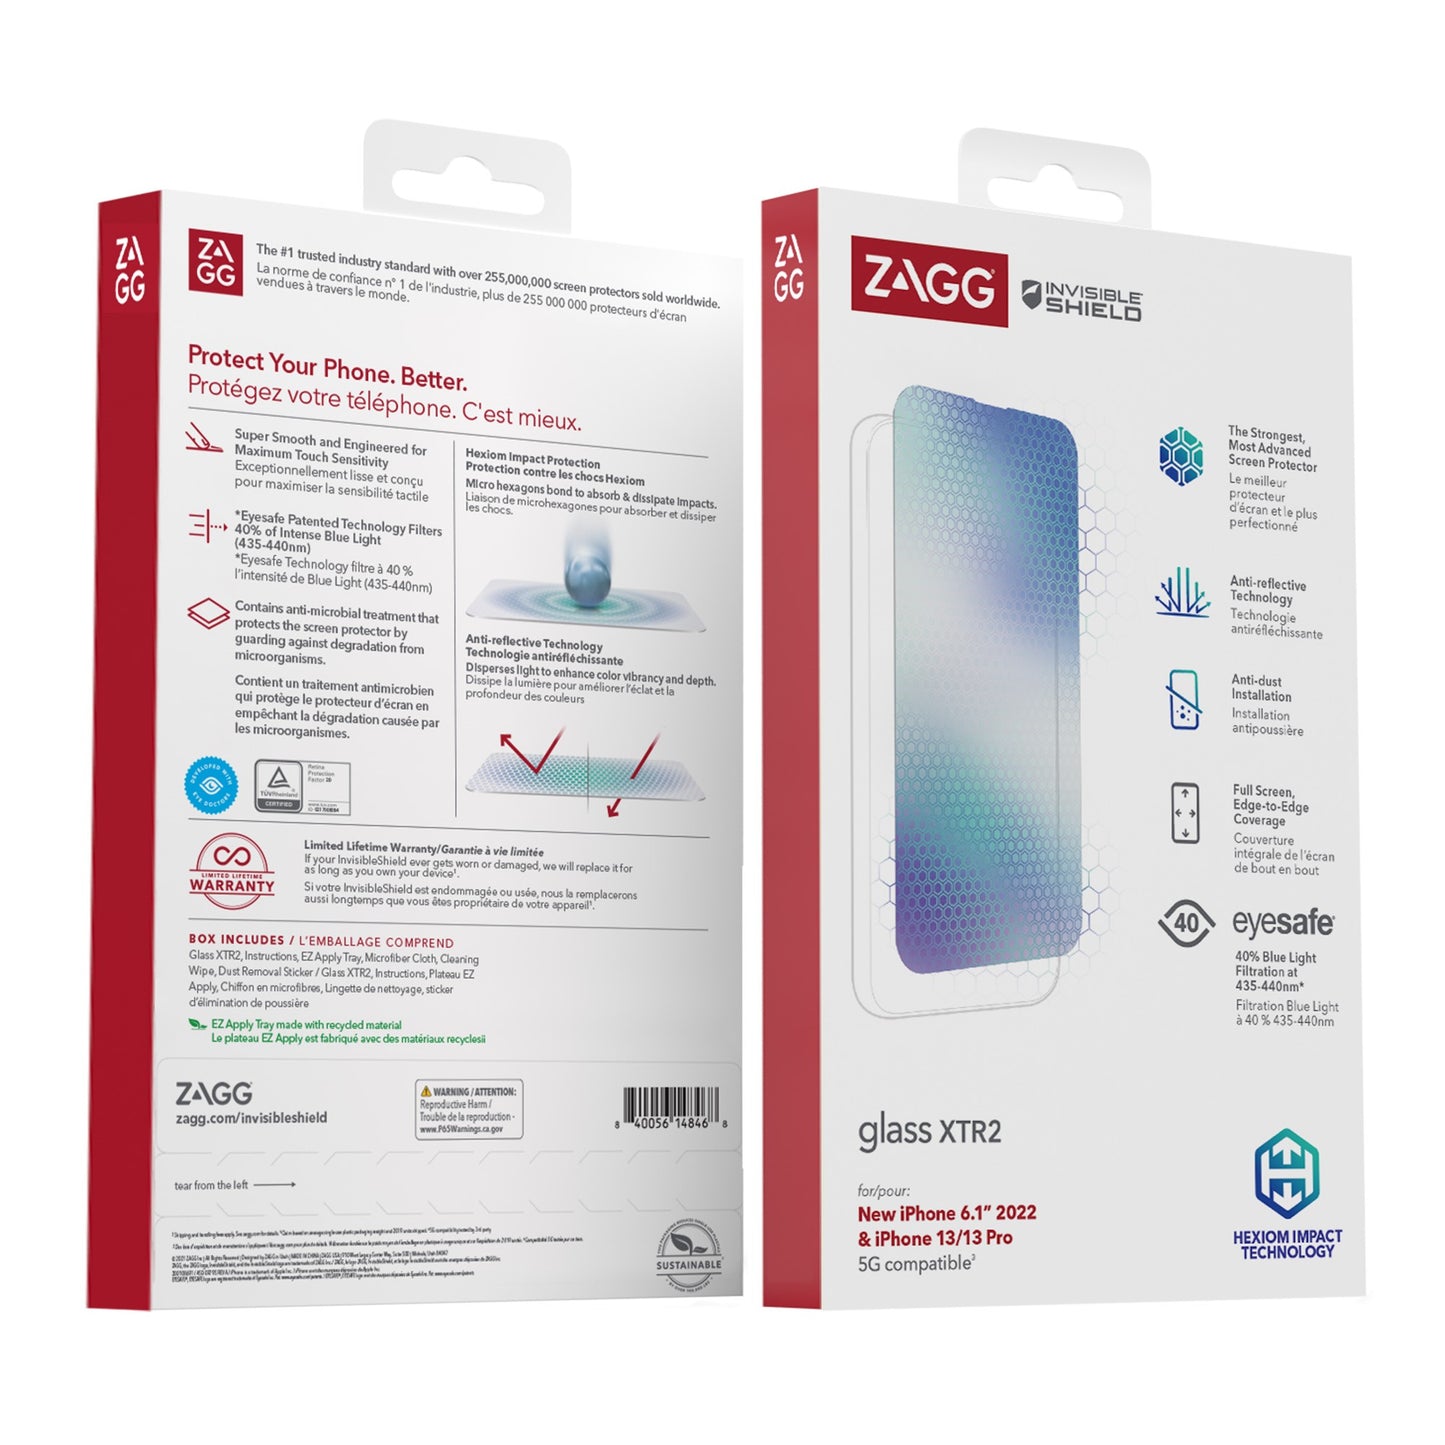 iPhone 14 Pro ZAGG InvisibleShield Glass XTR2 Screen Protector - 15-10500